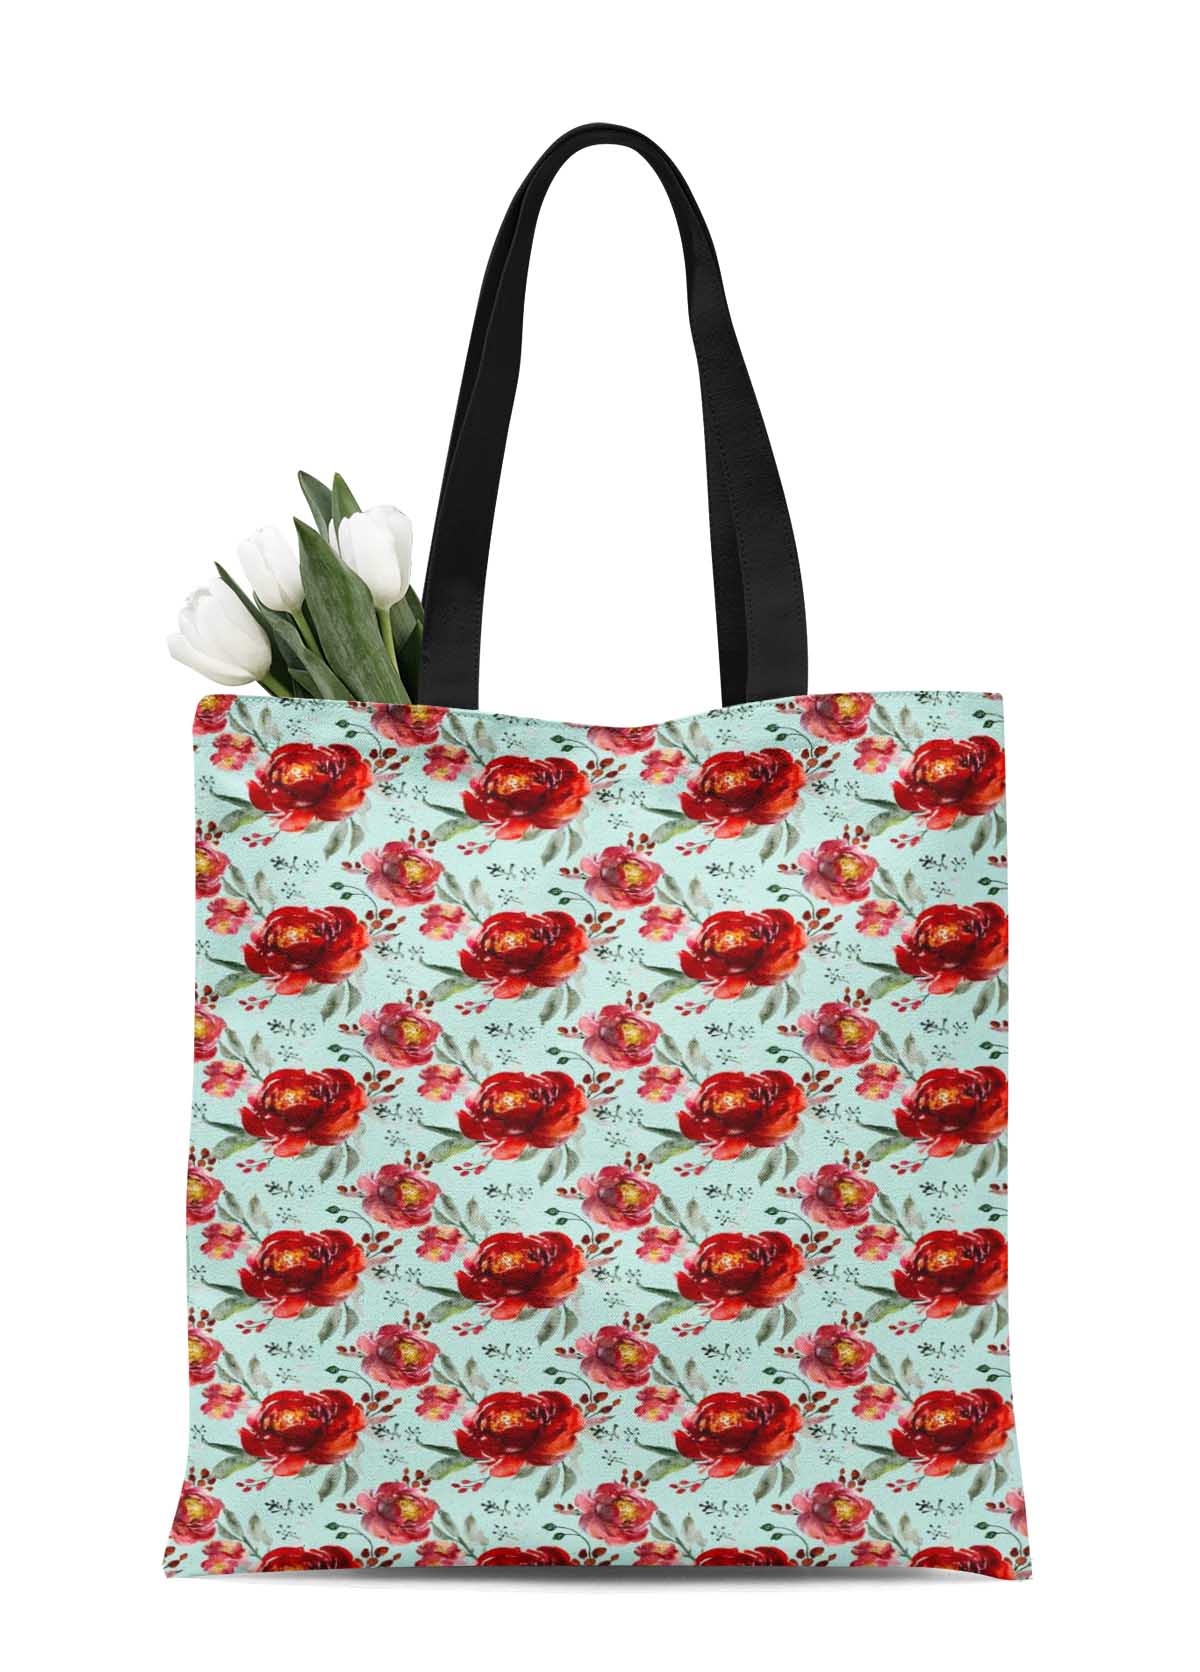 S4Sassy Floral Canvas Large Tote Bag for Beach Shopping Groceries Books